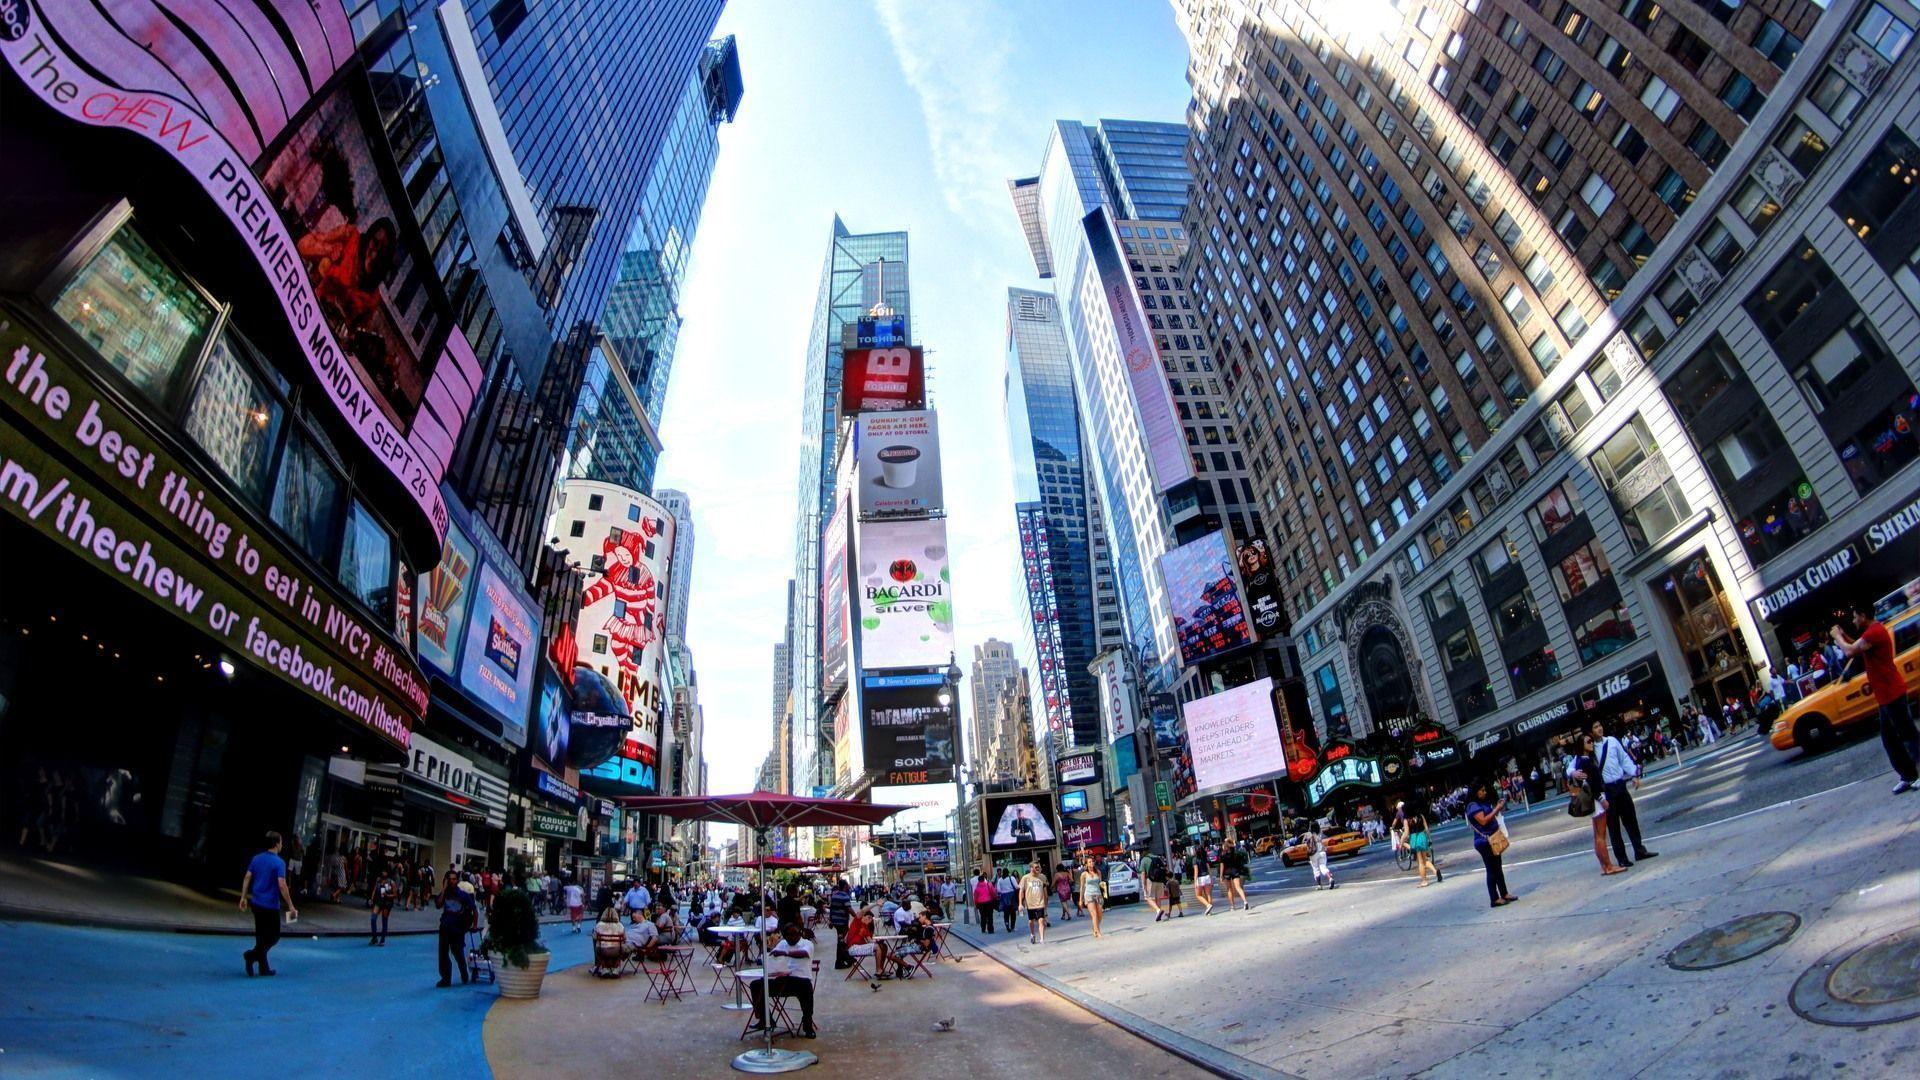 Time Square New York U.S. Travel photo and wallpaper